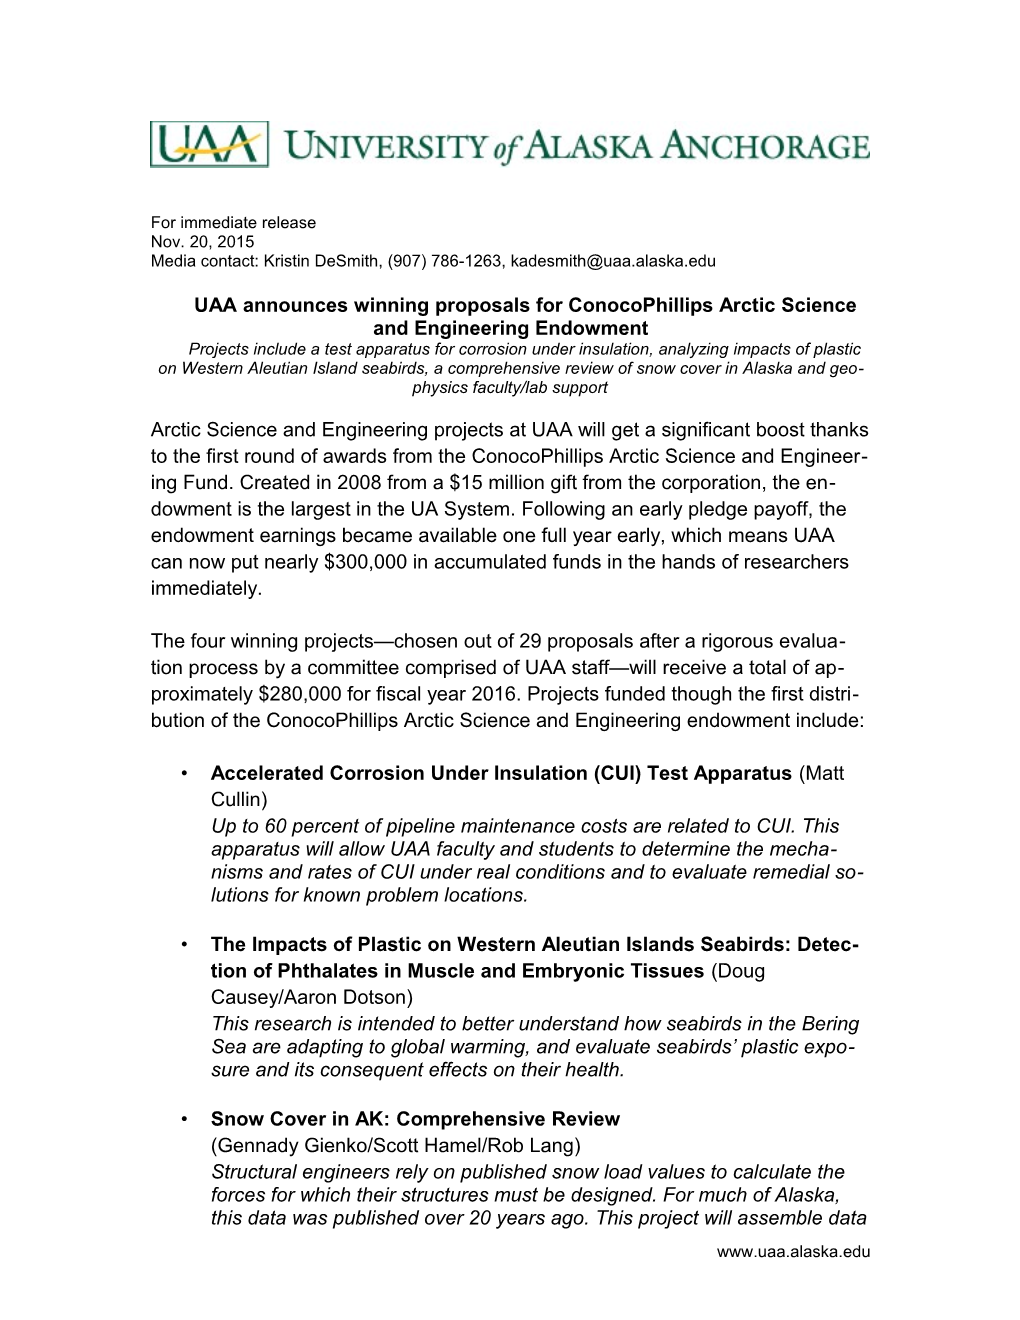 UAA Announces Winning Proposals for Conocophillips Arctic Science and Engineering Endowment